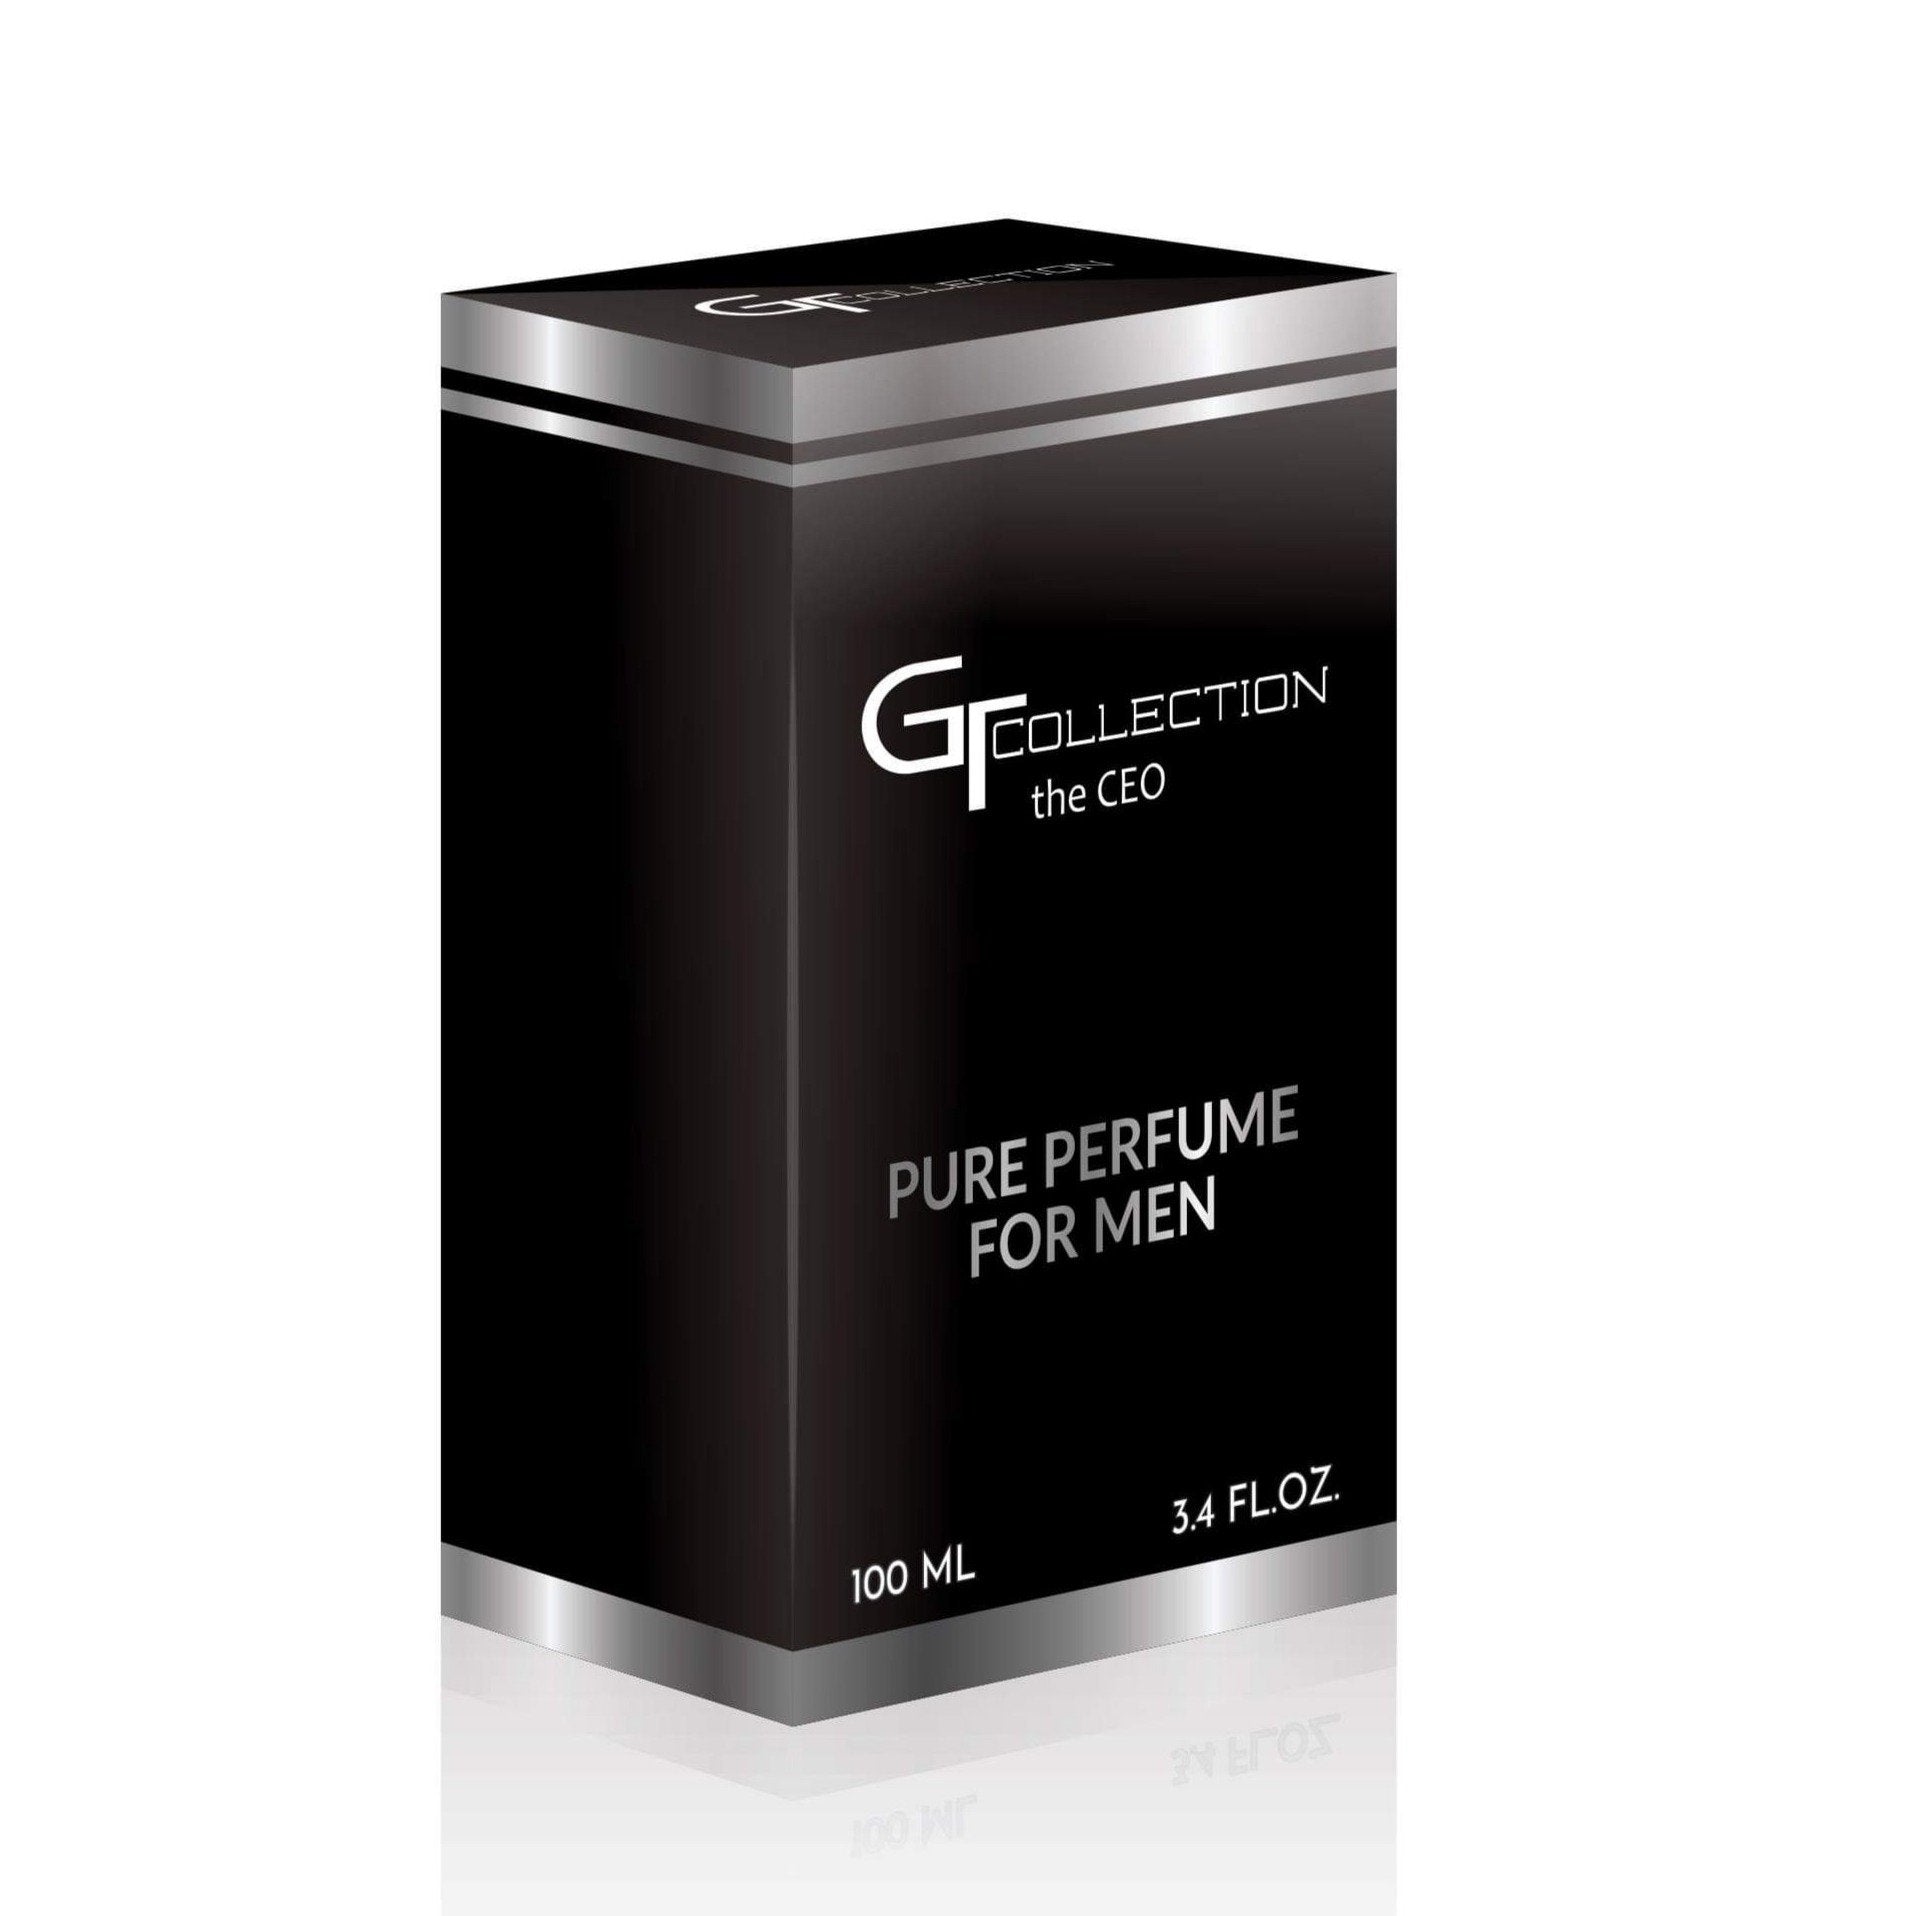 GT Collection The CEO | Pure Perfume for Men - 100 ml